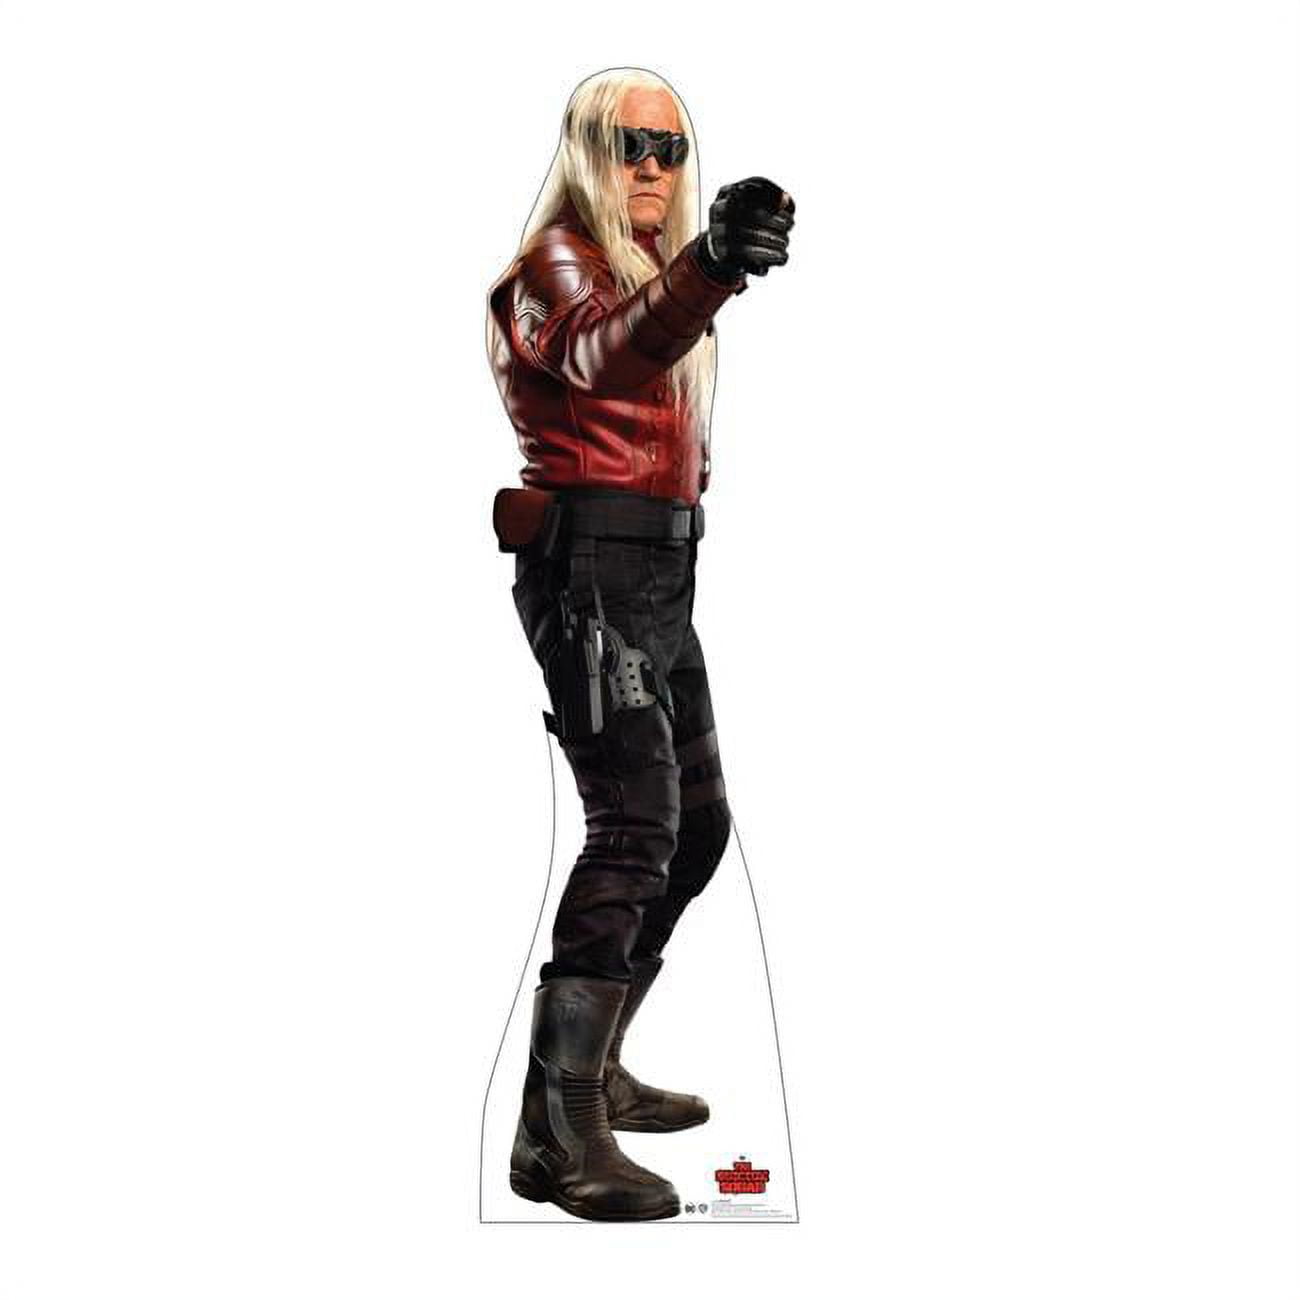 Advanced Graphics 3770 70 x 19 in. Savant Cardboard Cutout, WB - The Suicide Squad 2